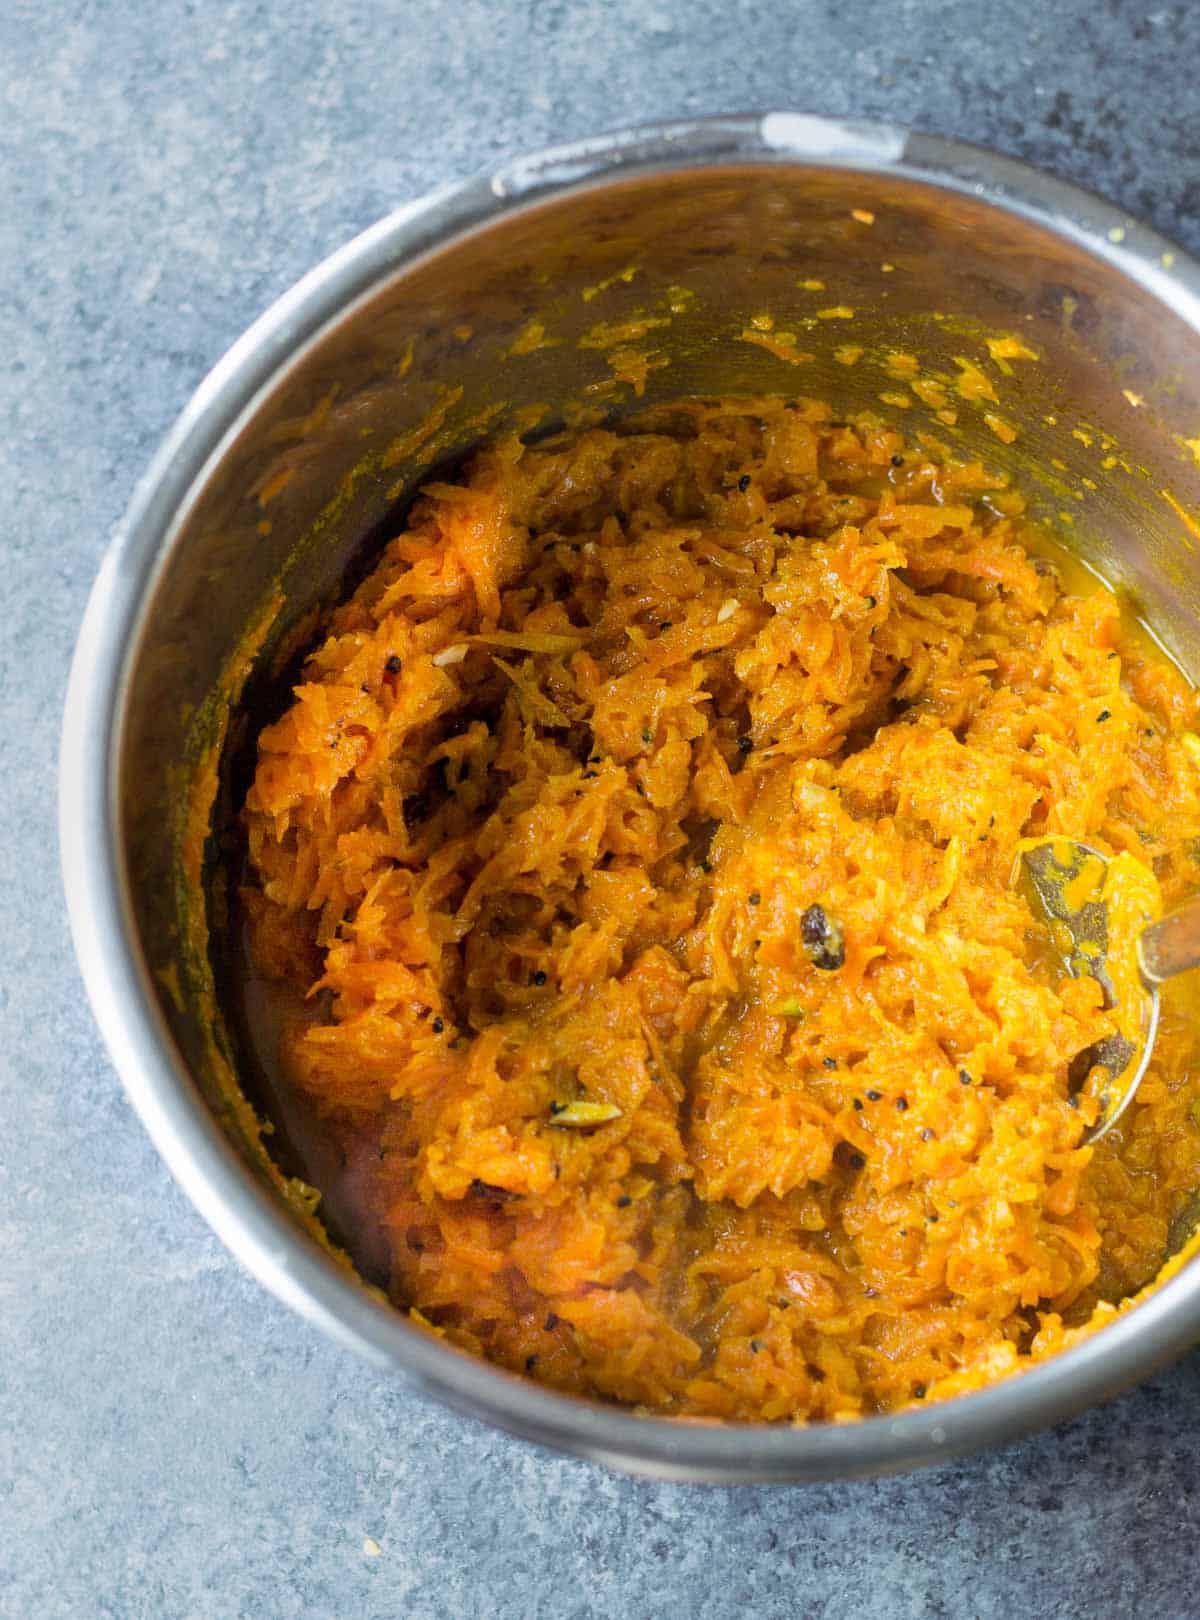 Making gajar halwa in an Instant Pot can be so easy. Who knew?